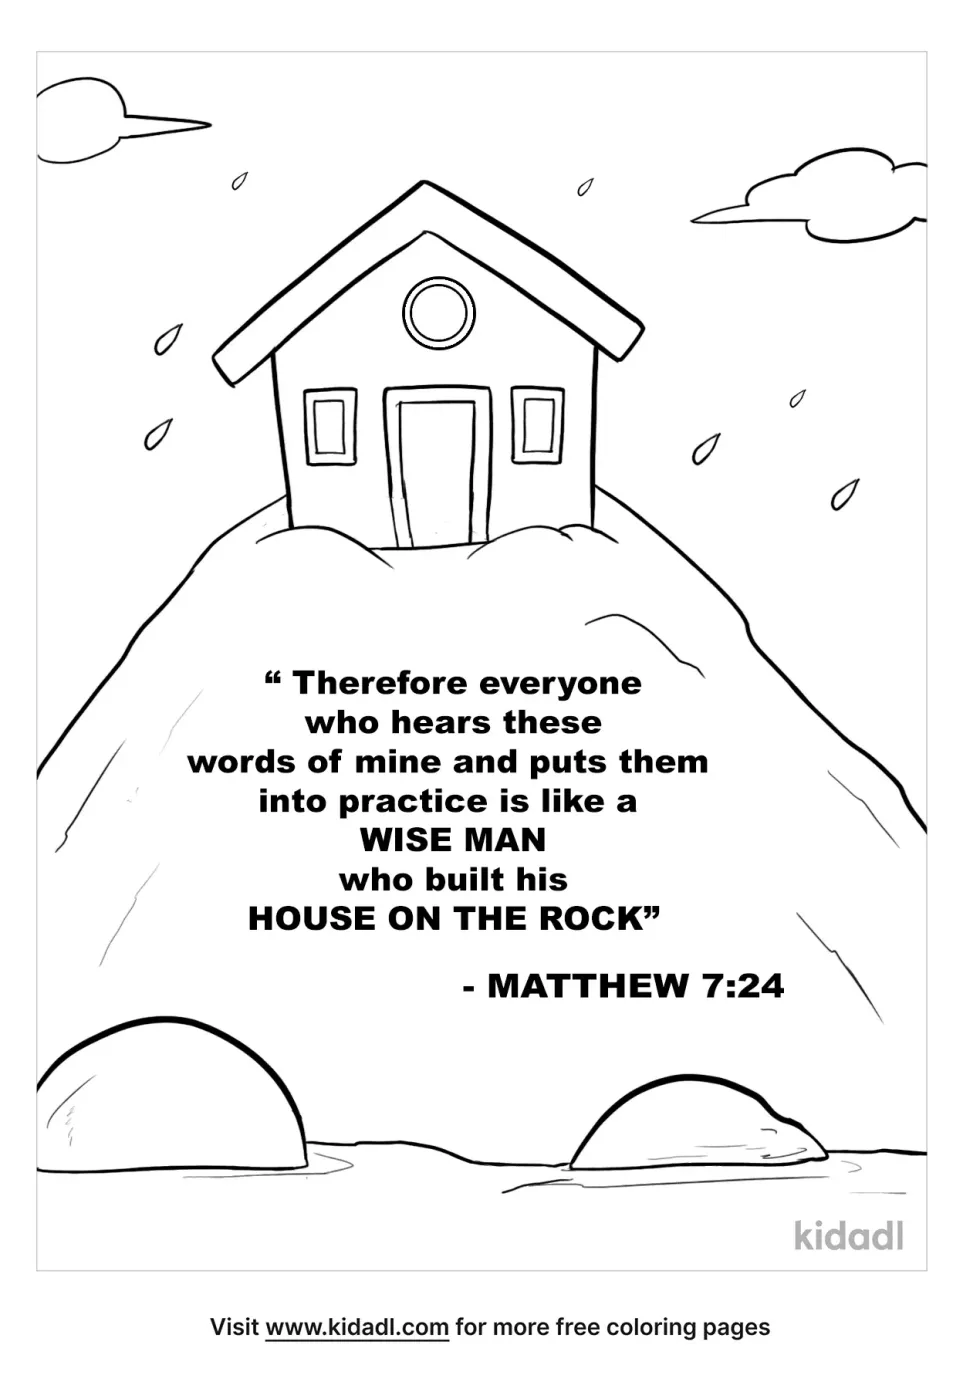 The Wise Man Built His House Upon The Rock Coloring Page